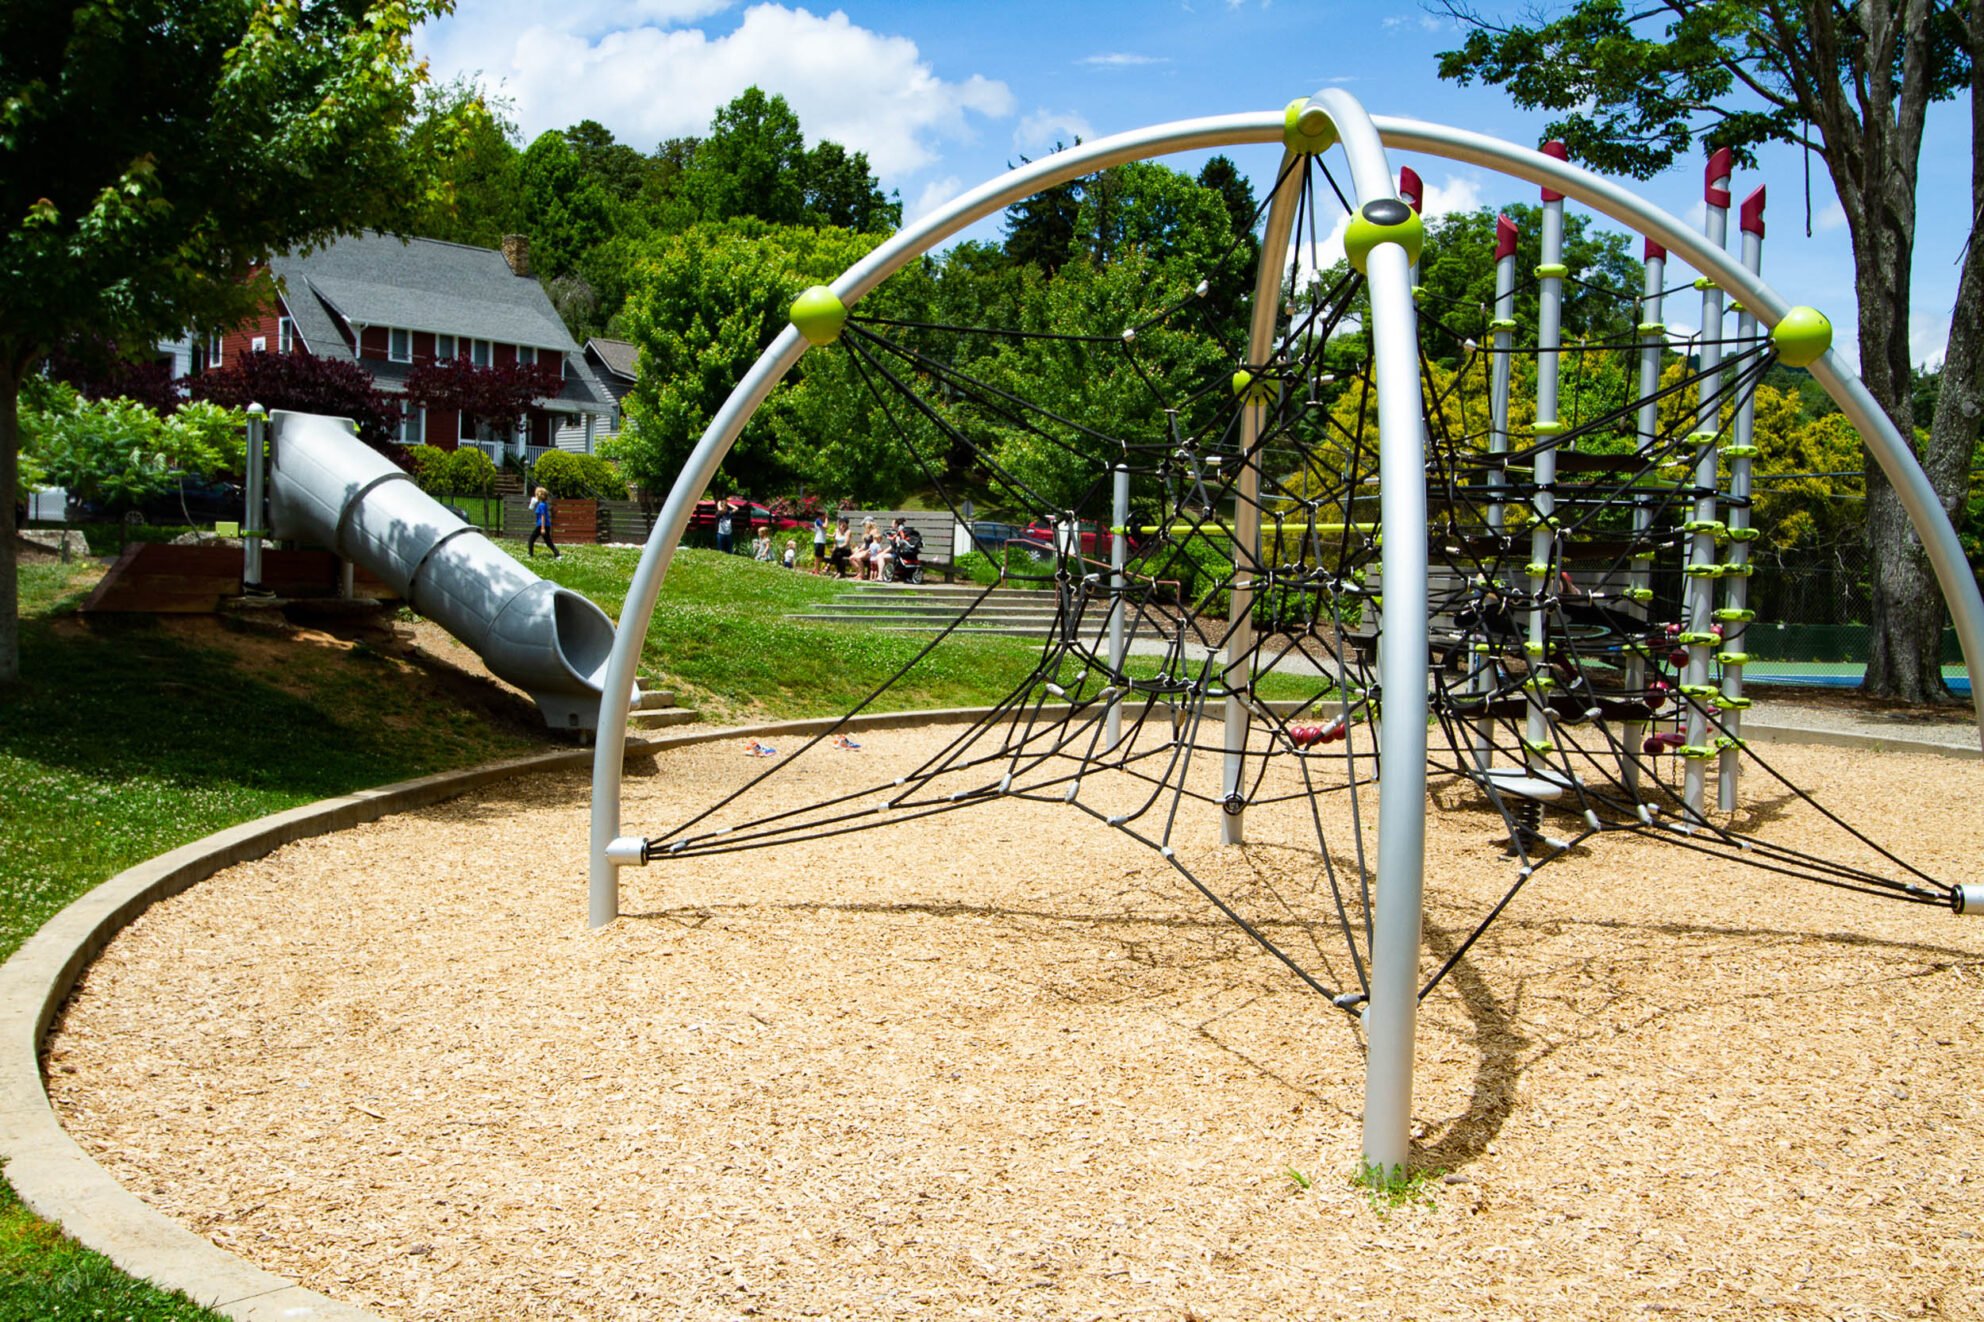 Save on Health Care at the Playground – Silver Century Foundation